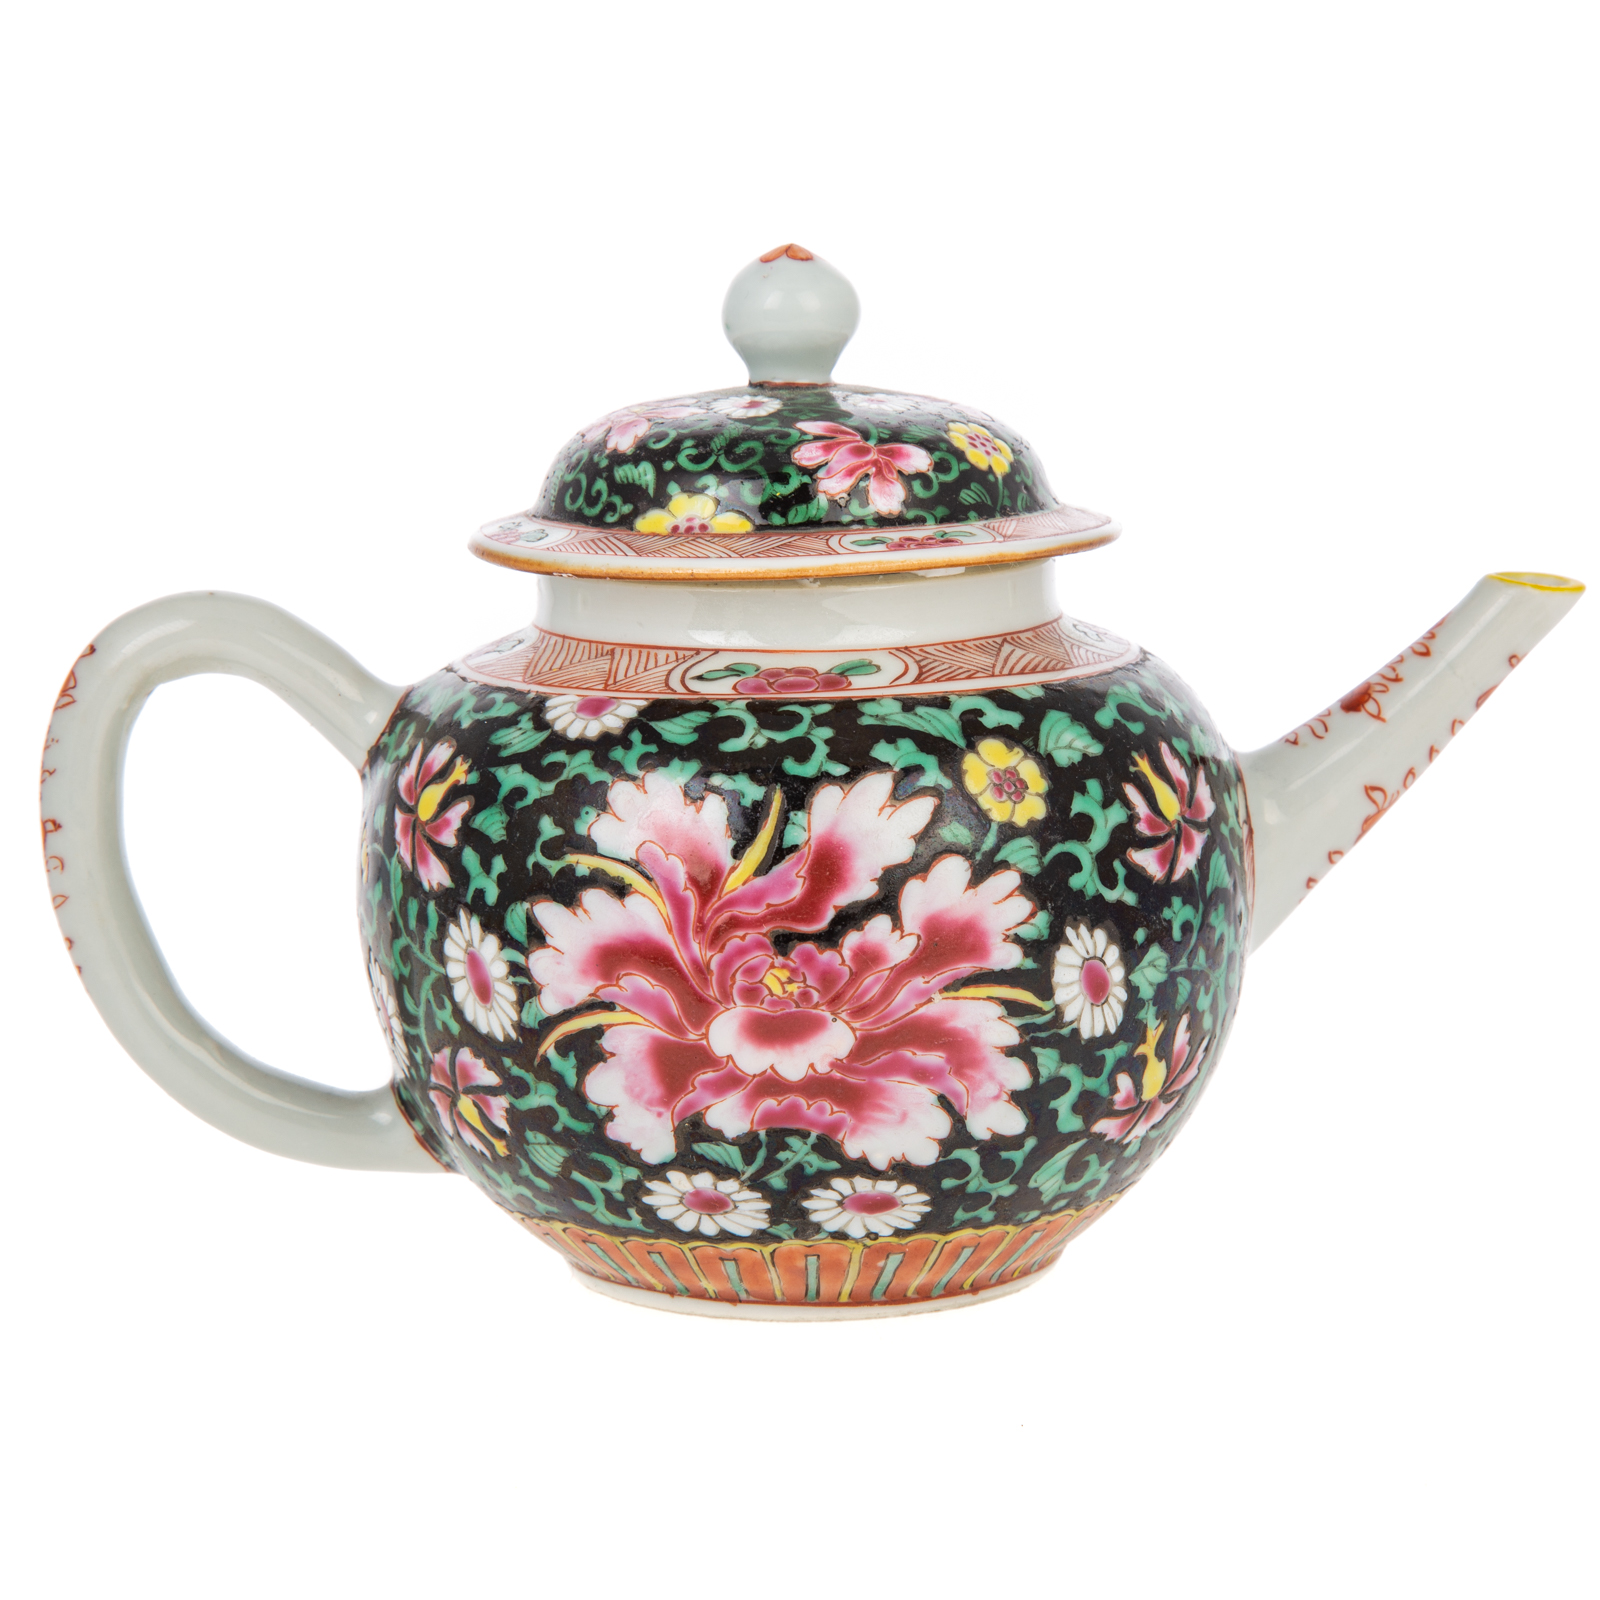 CHINESE EXPORT FAMILLE NOIR TEAPOT 36a625